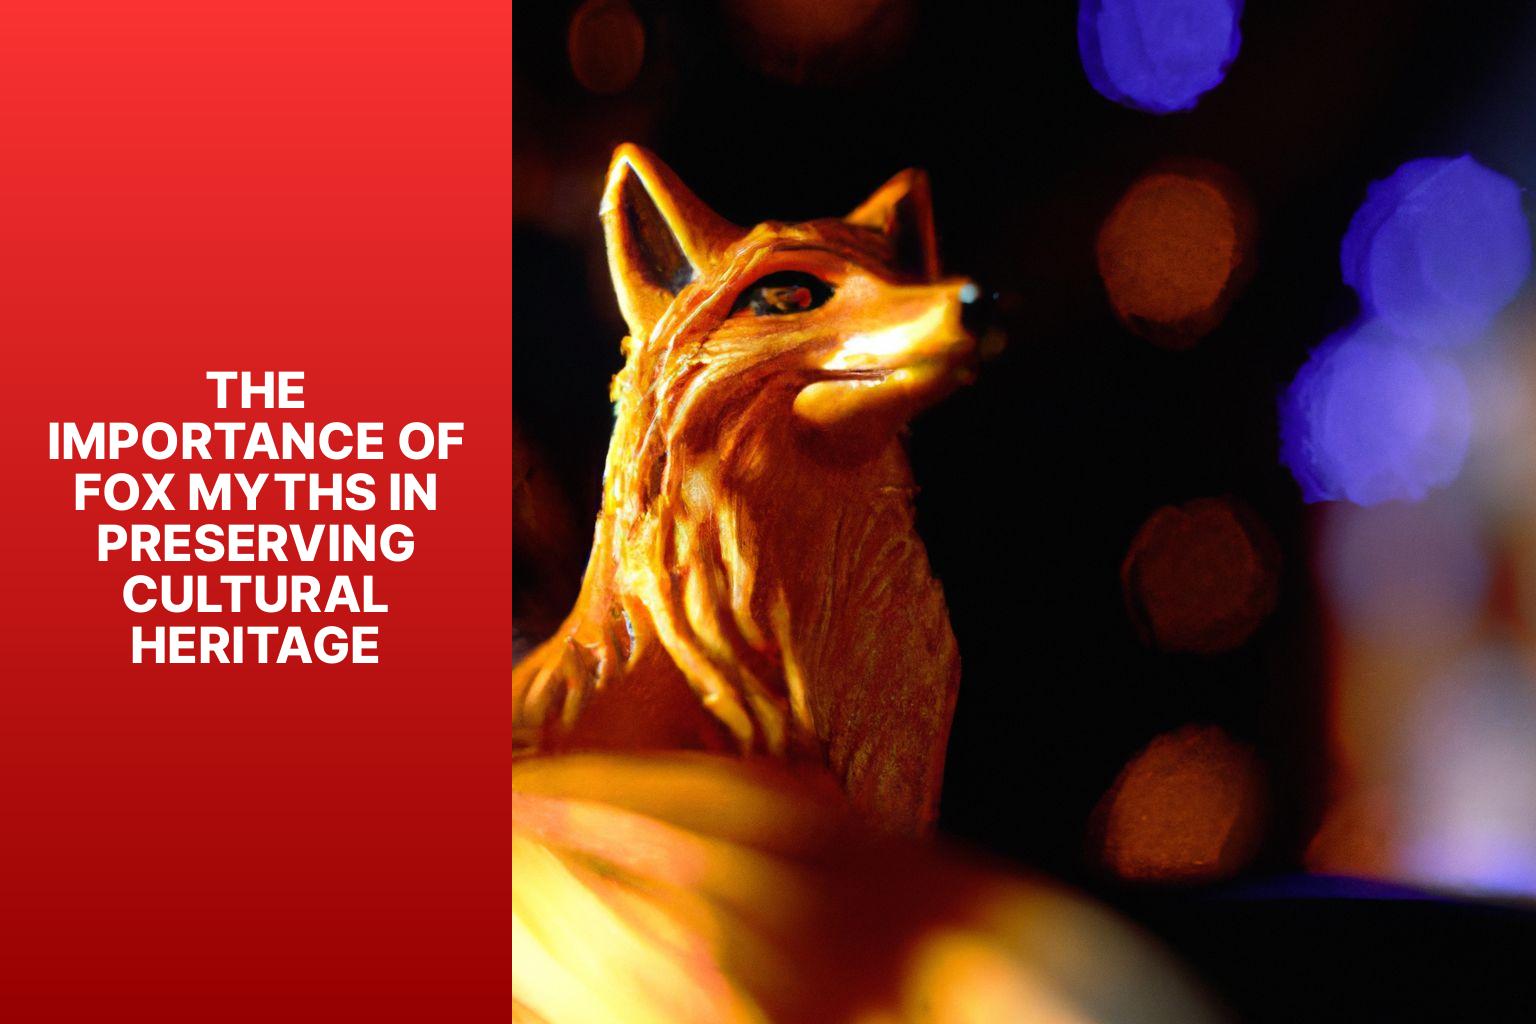 The Importance of Fox Myths in Preserving Cultural Heritage - Fox Myths in Modern Times 